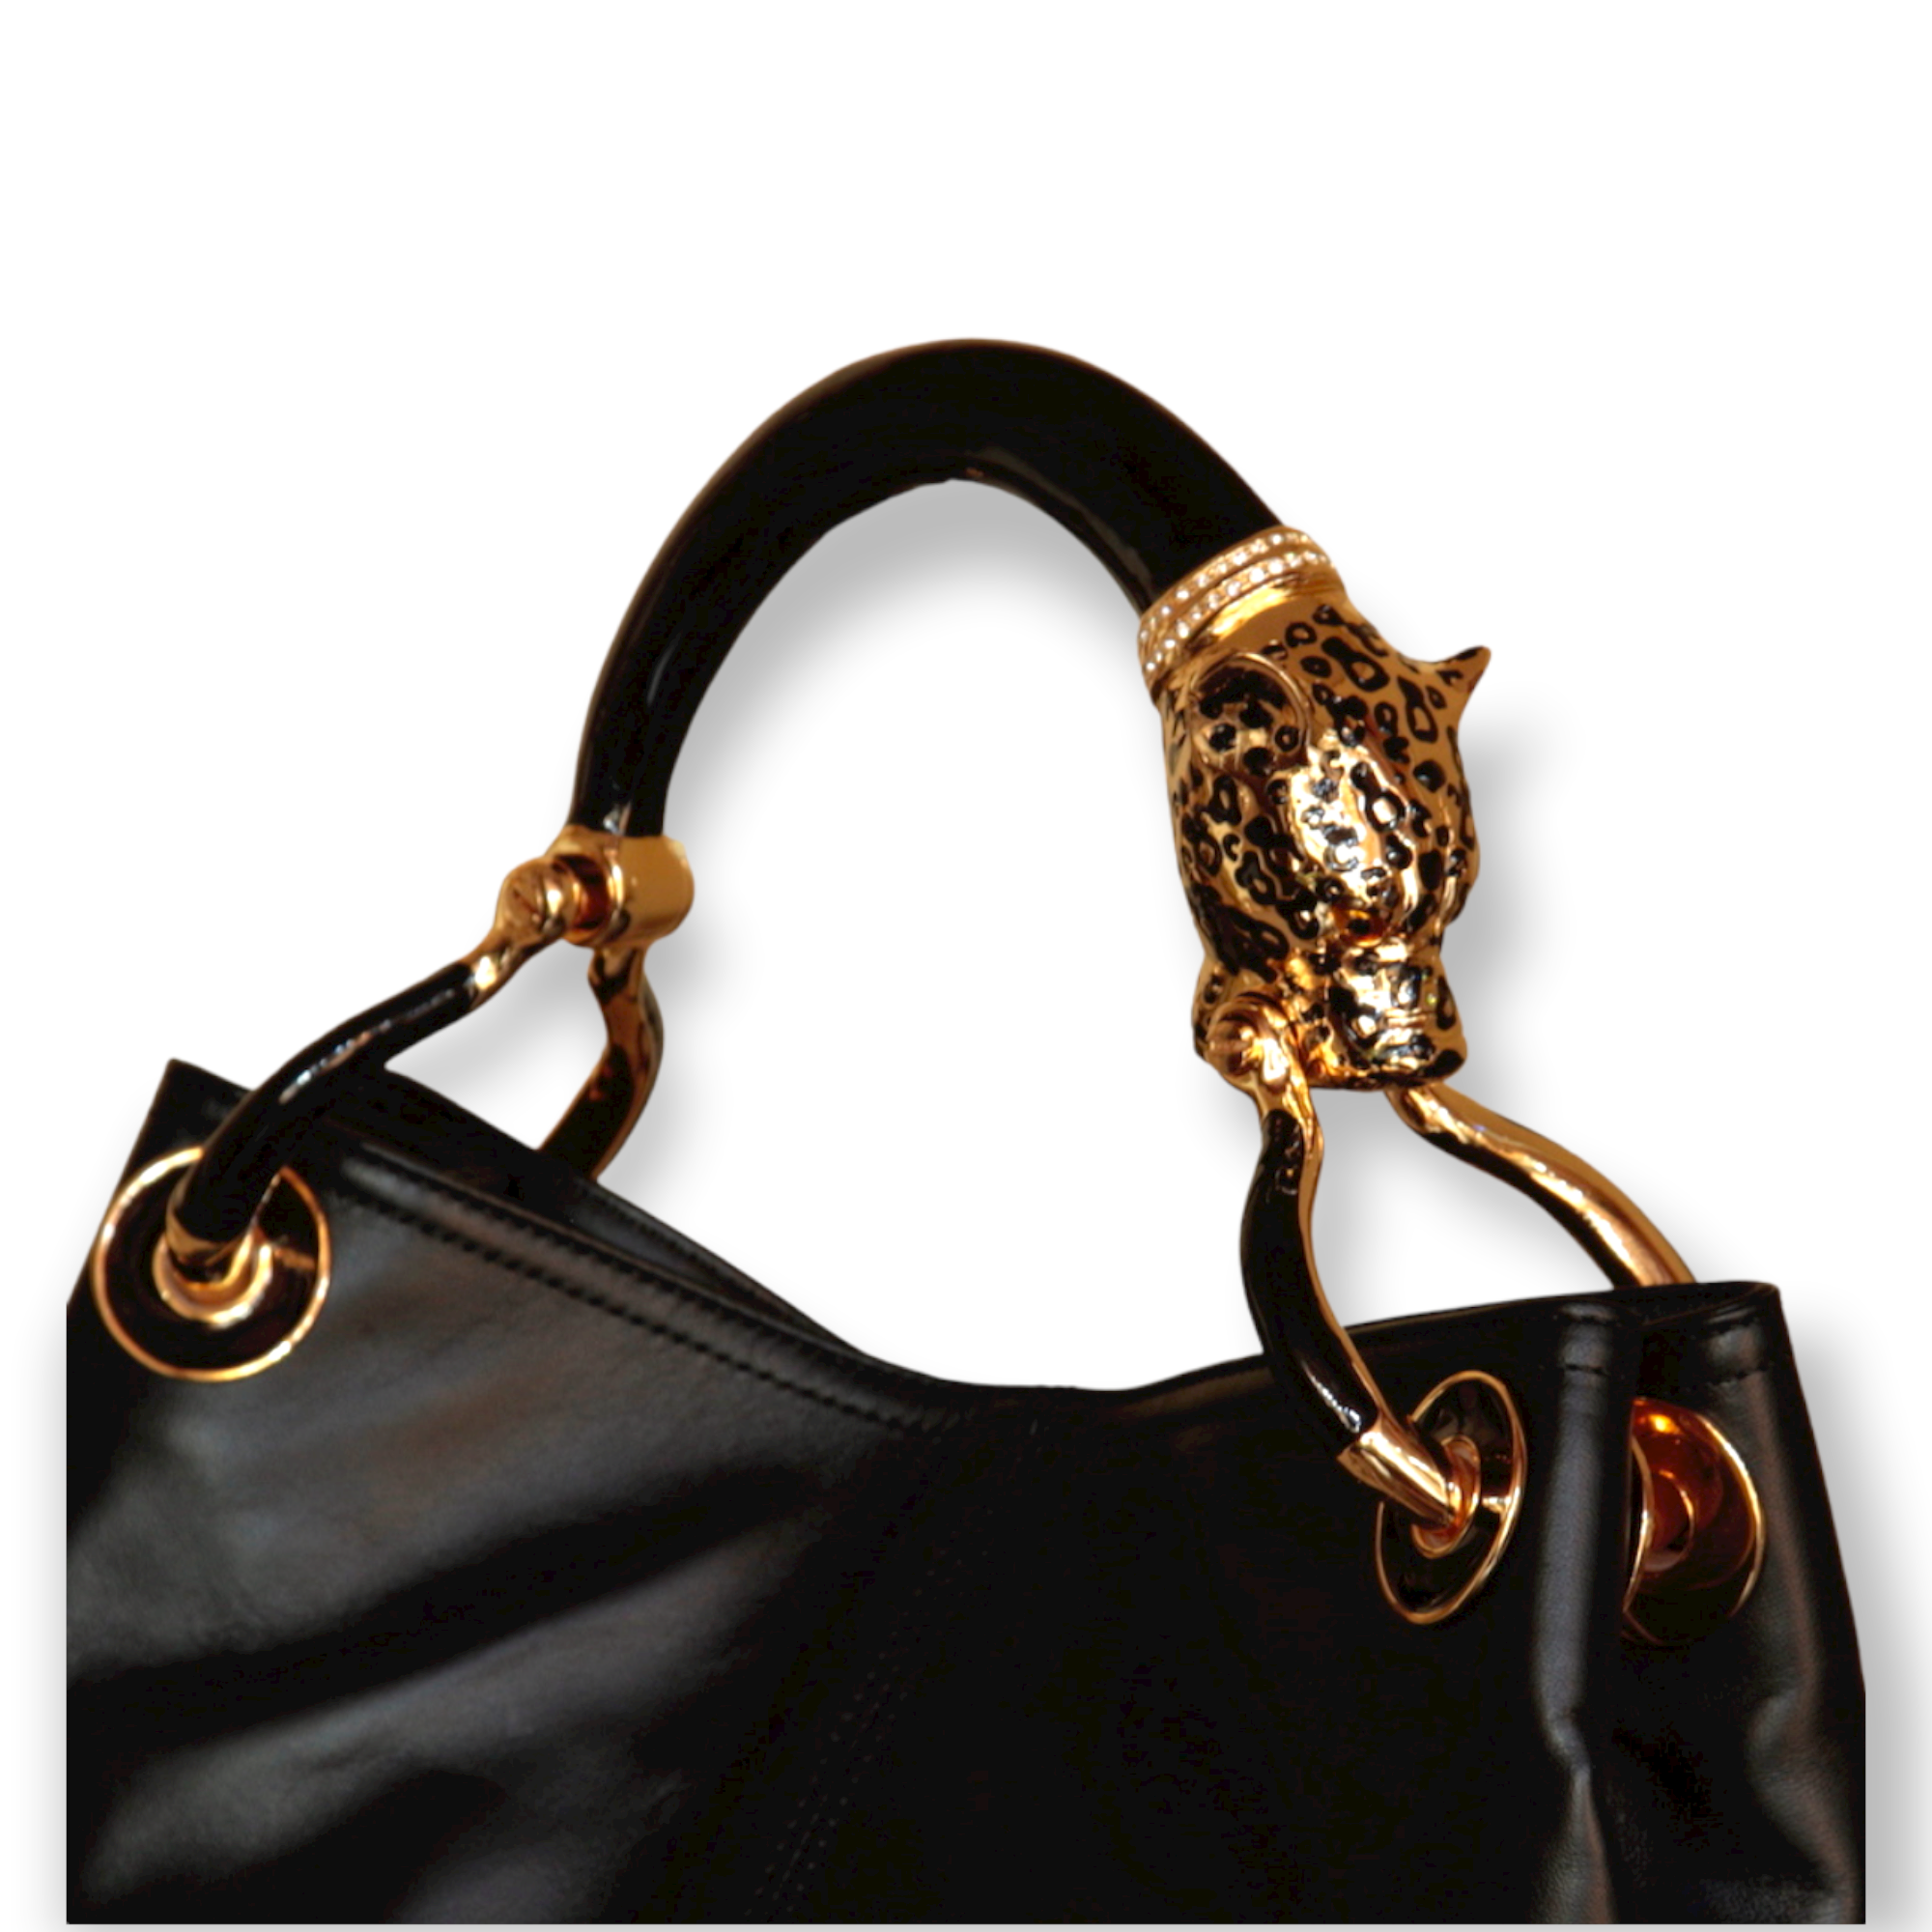 . Precious handbag made in Italy with fine accessories  Creart2 made in polychrome enamels and exclusive hides